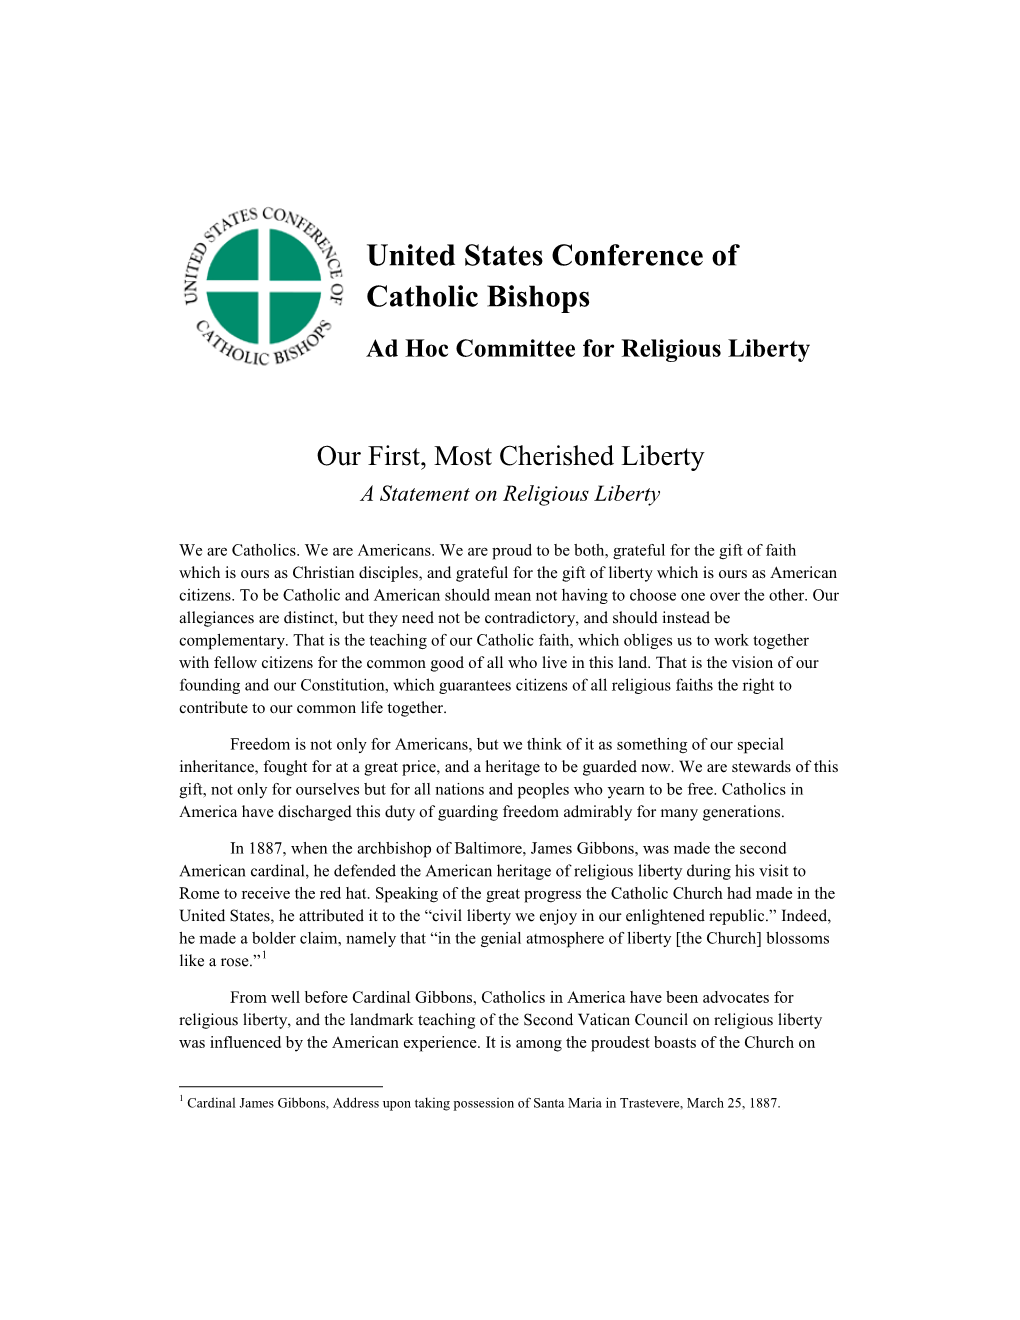 A Statement on Religious Liberty